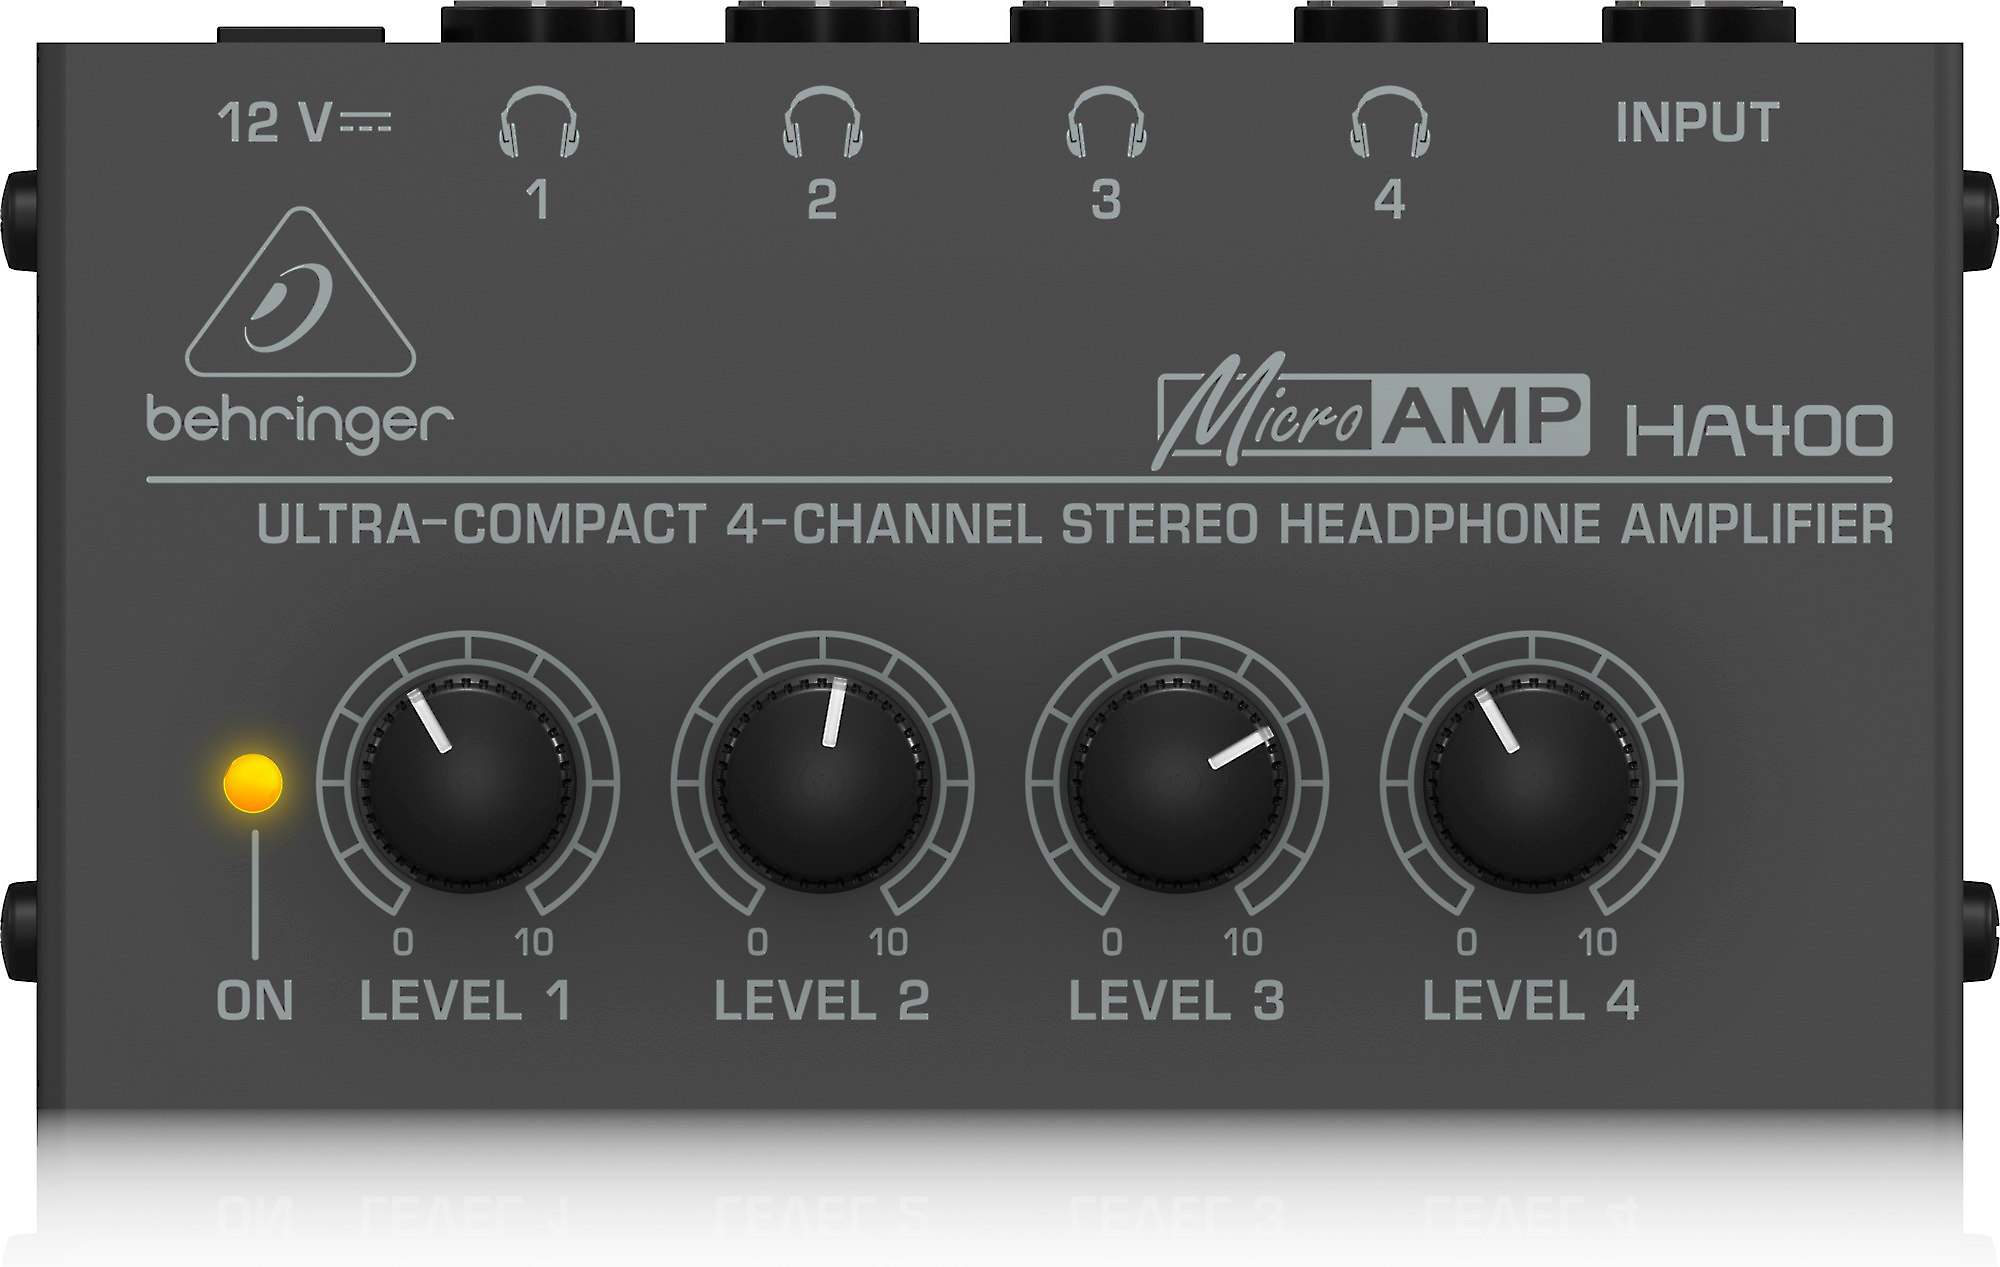 Behringer Microamp Ha400 4 Channel Stereo Headphone Amplifier At Crutchfield